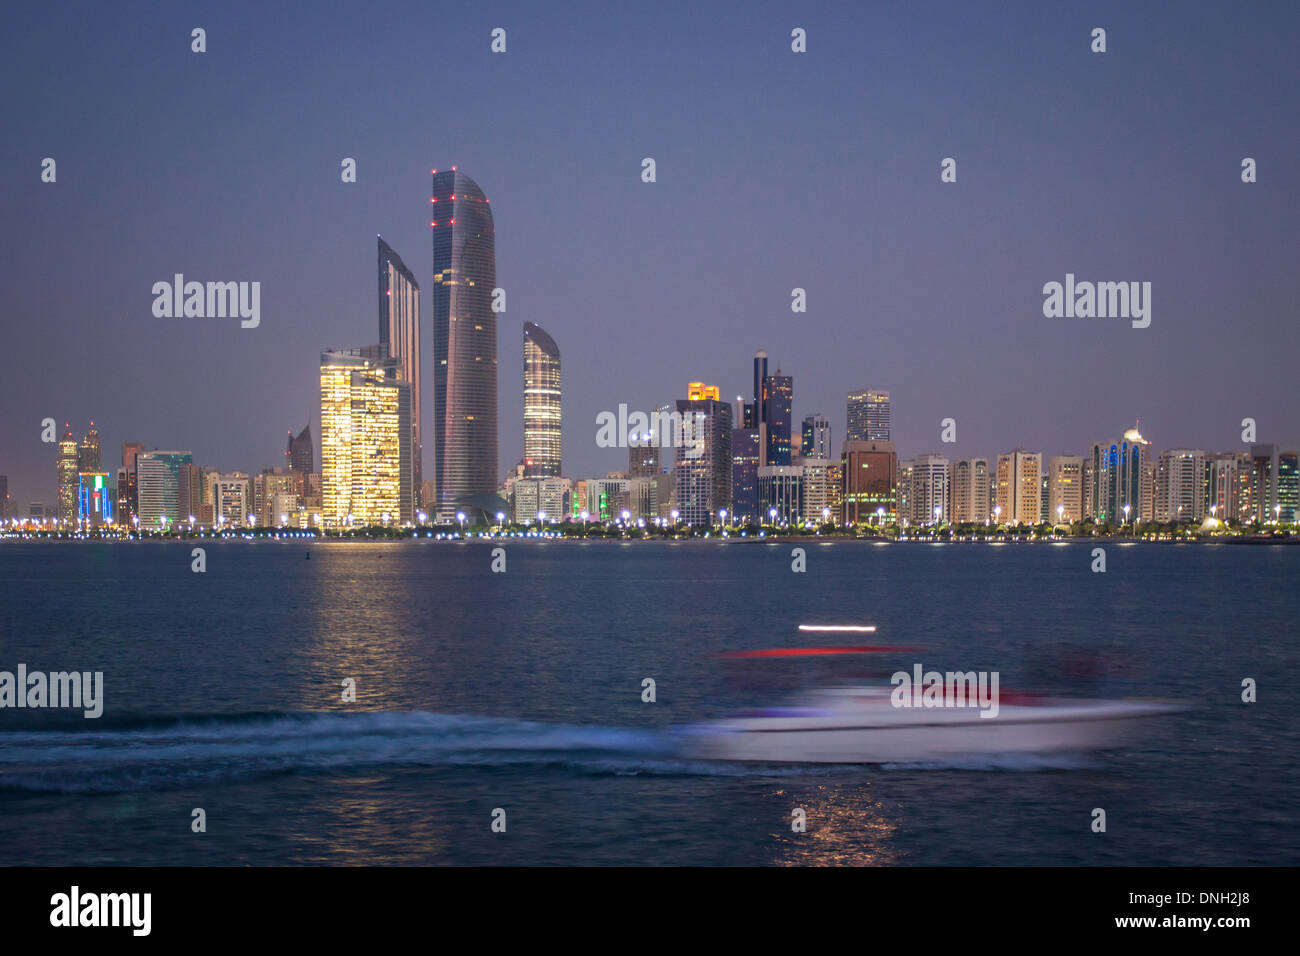 YACHT SAILING IN FRONT OF THE SKYSCRAPERS OF ABU DHABI, UNITED ARAB EMIRATES, MIDDLE EAST Stock Photo